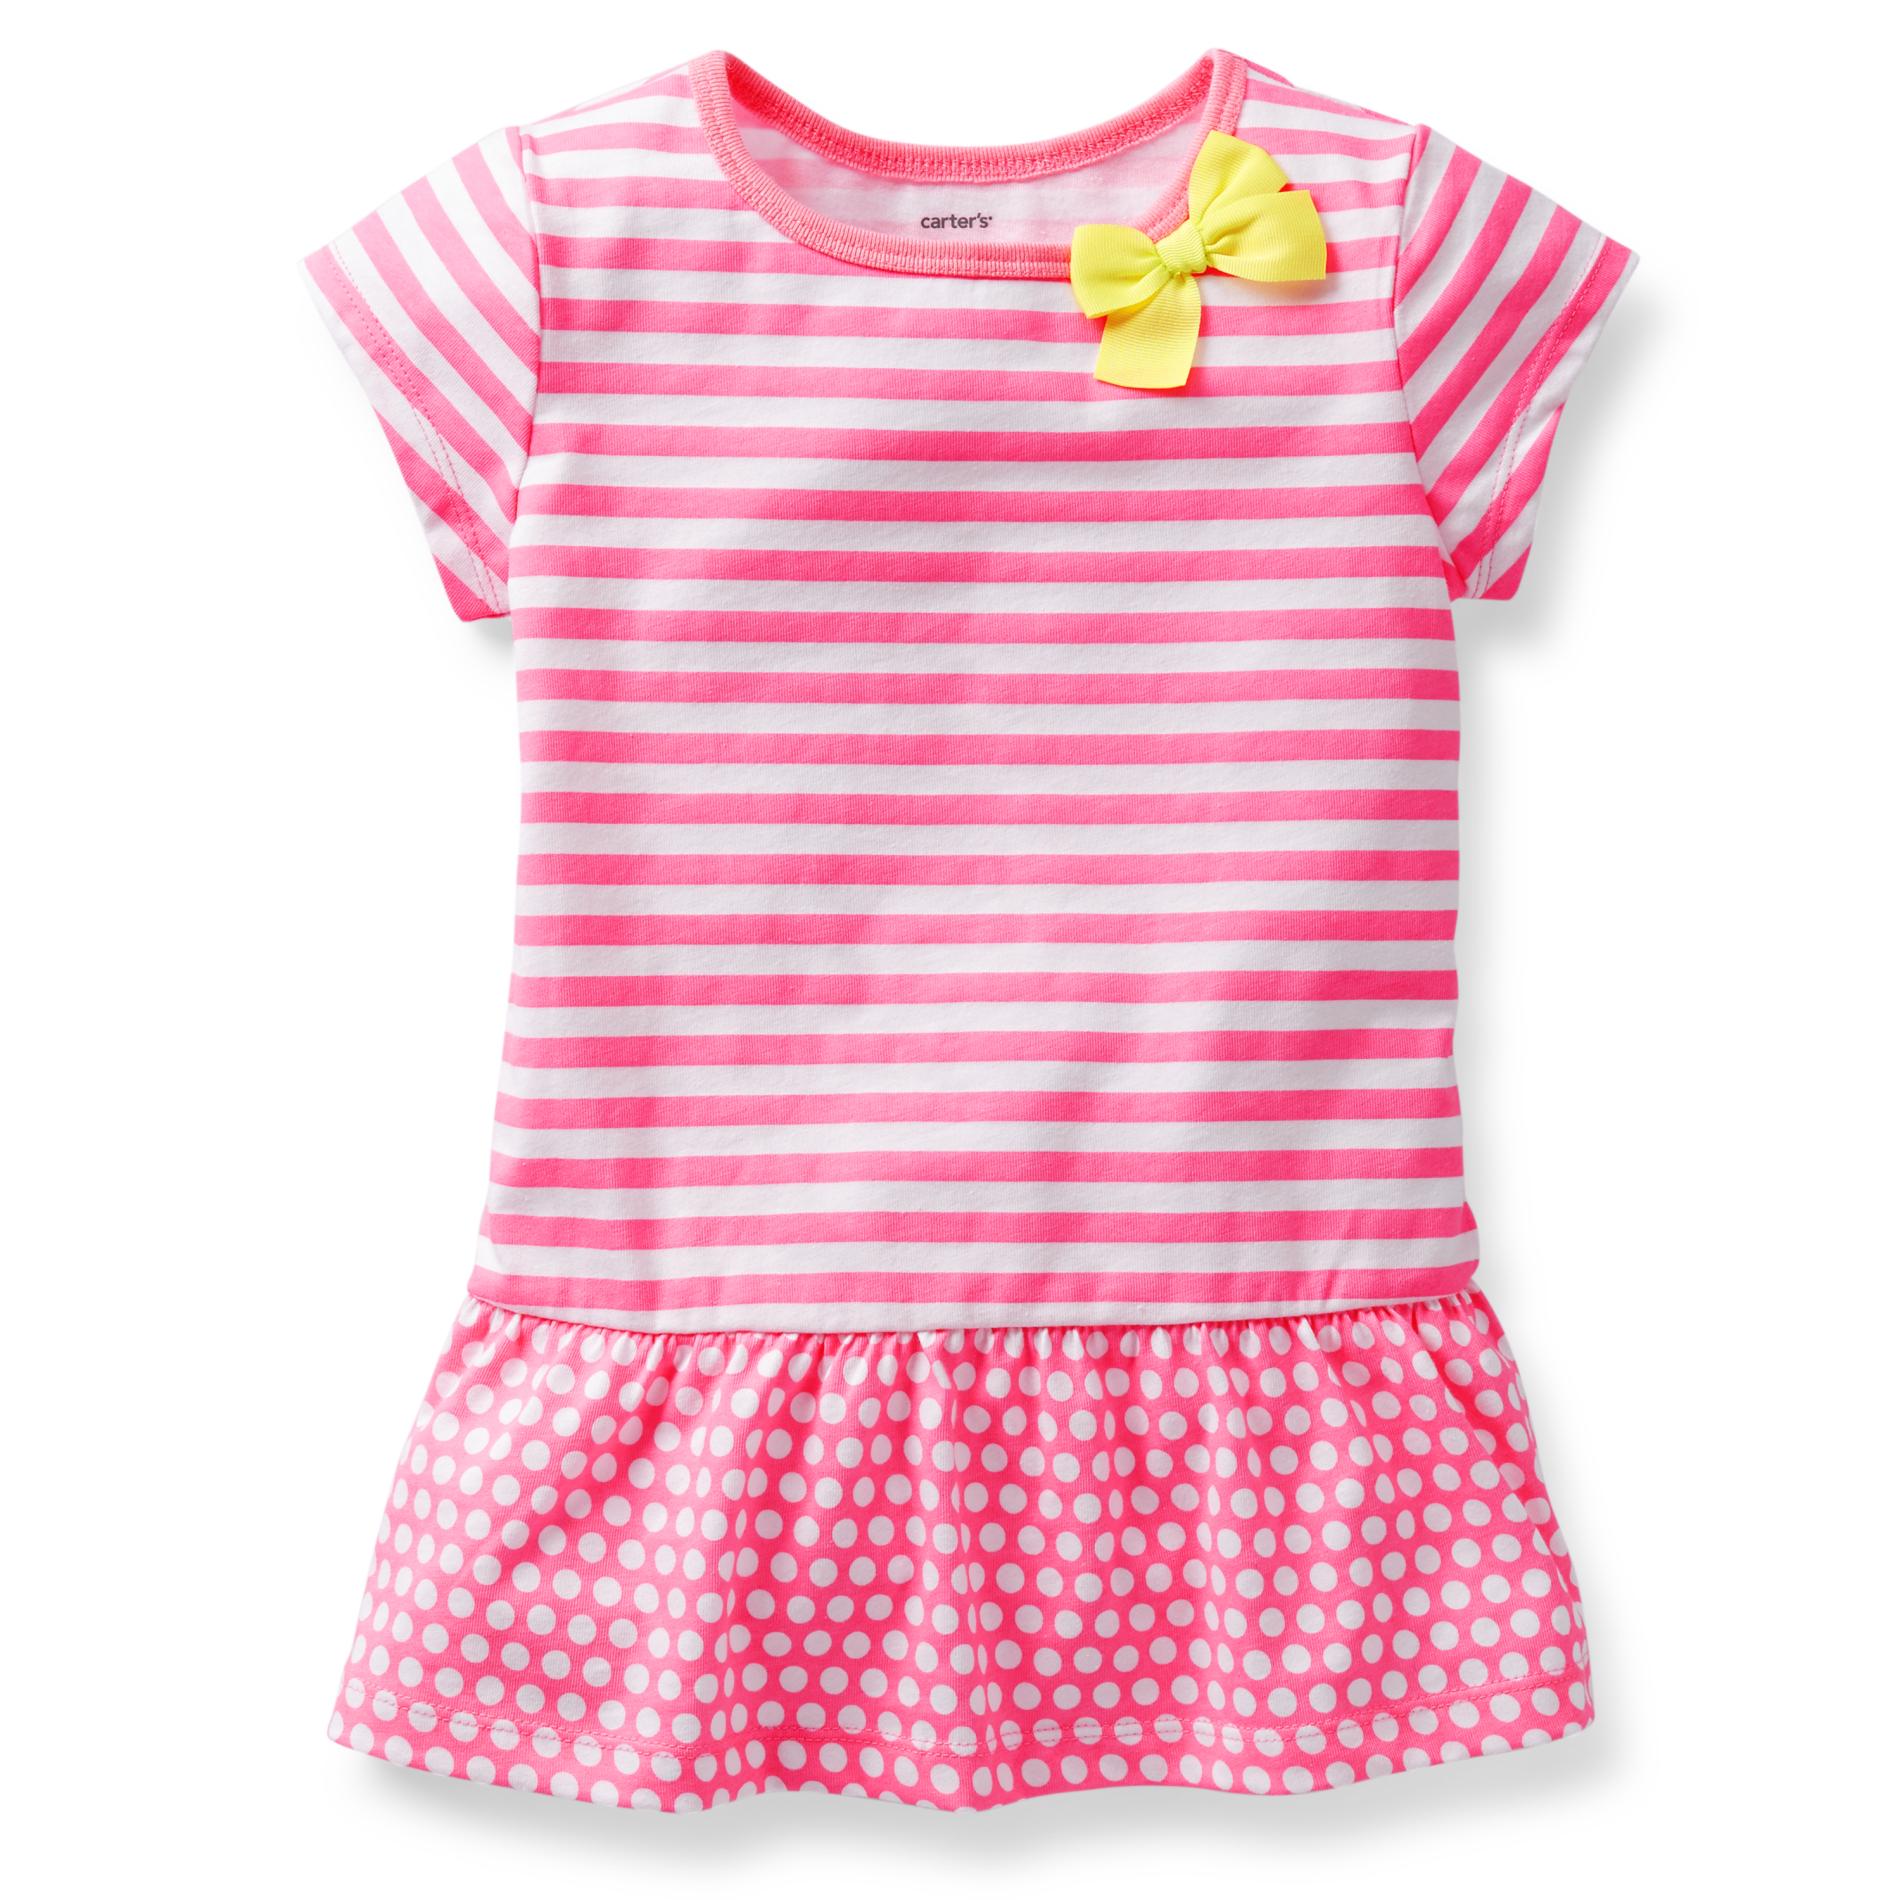 Carter's Girl's Knit Tunic Top - Stripes & Dots